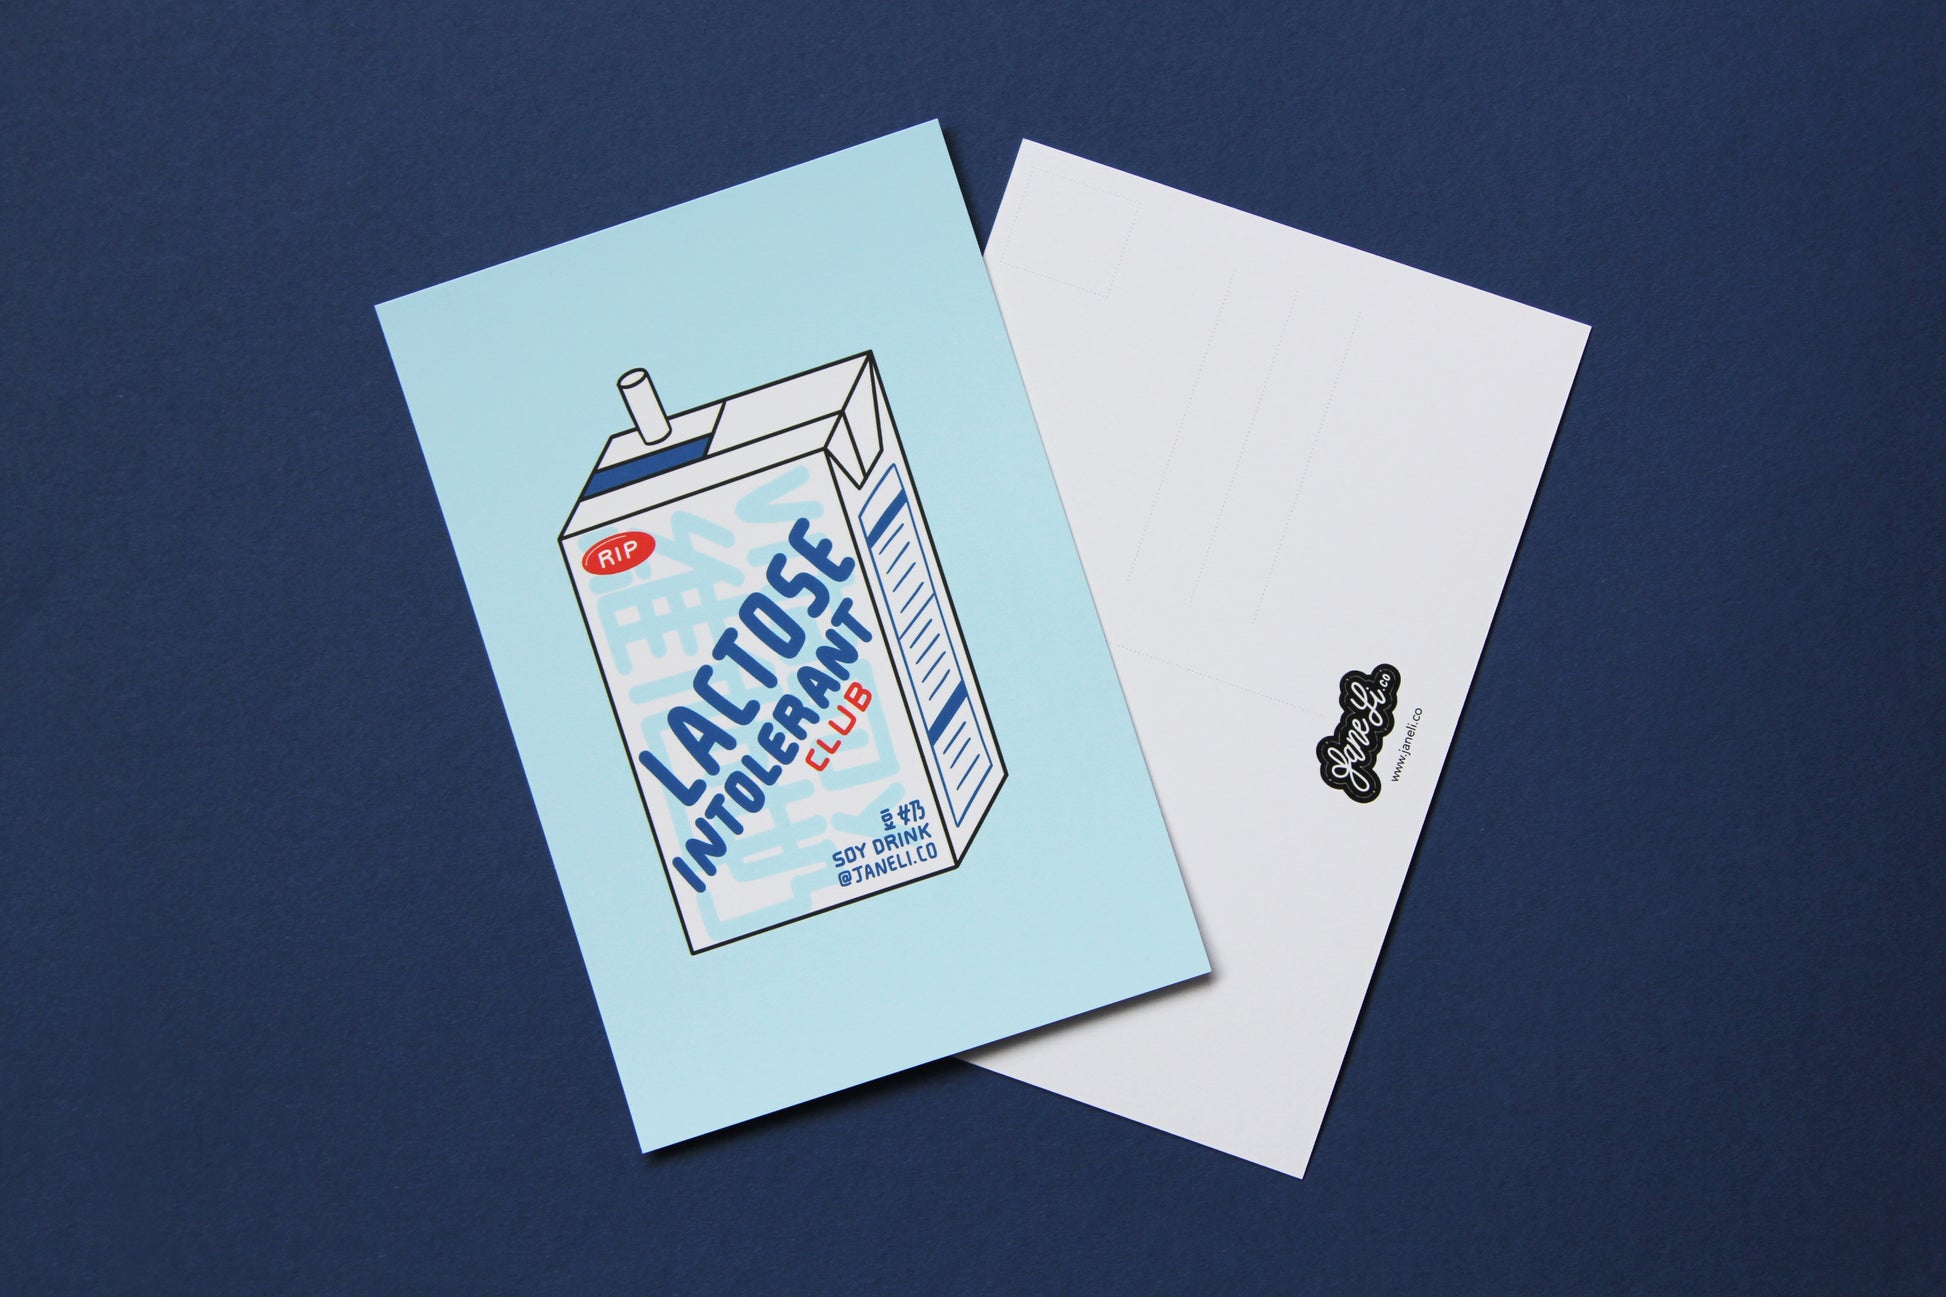 A JaneLi.Co mini print/postcard of a soymilk carton that says "Lactose Intolerant Club" and a back postcard side of the same print over a navy background.